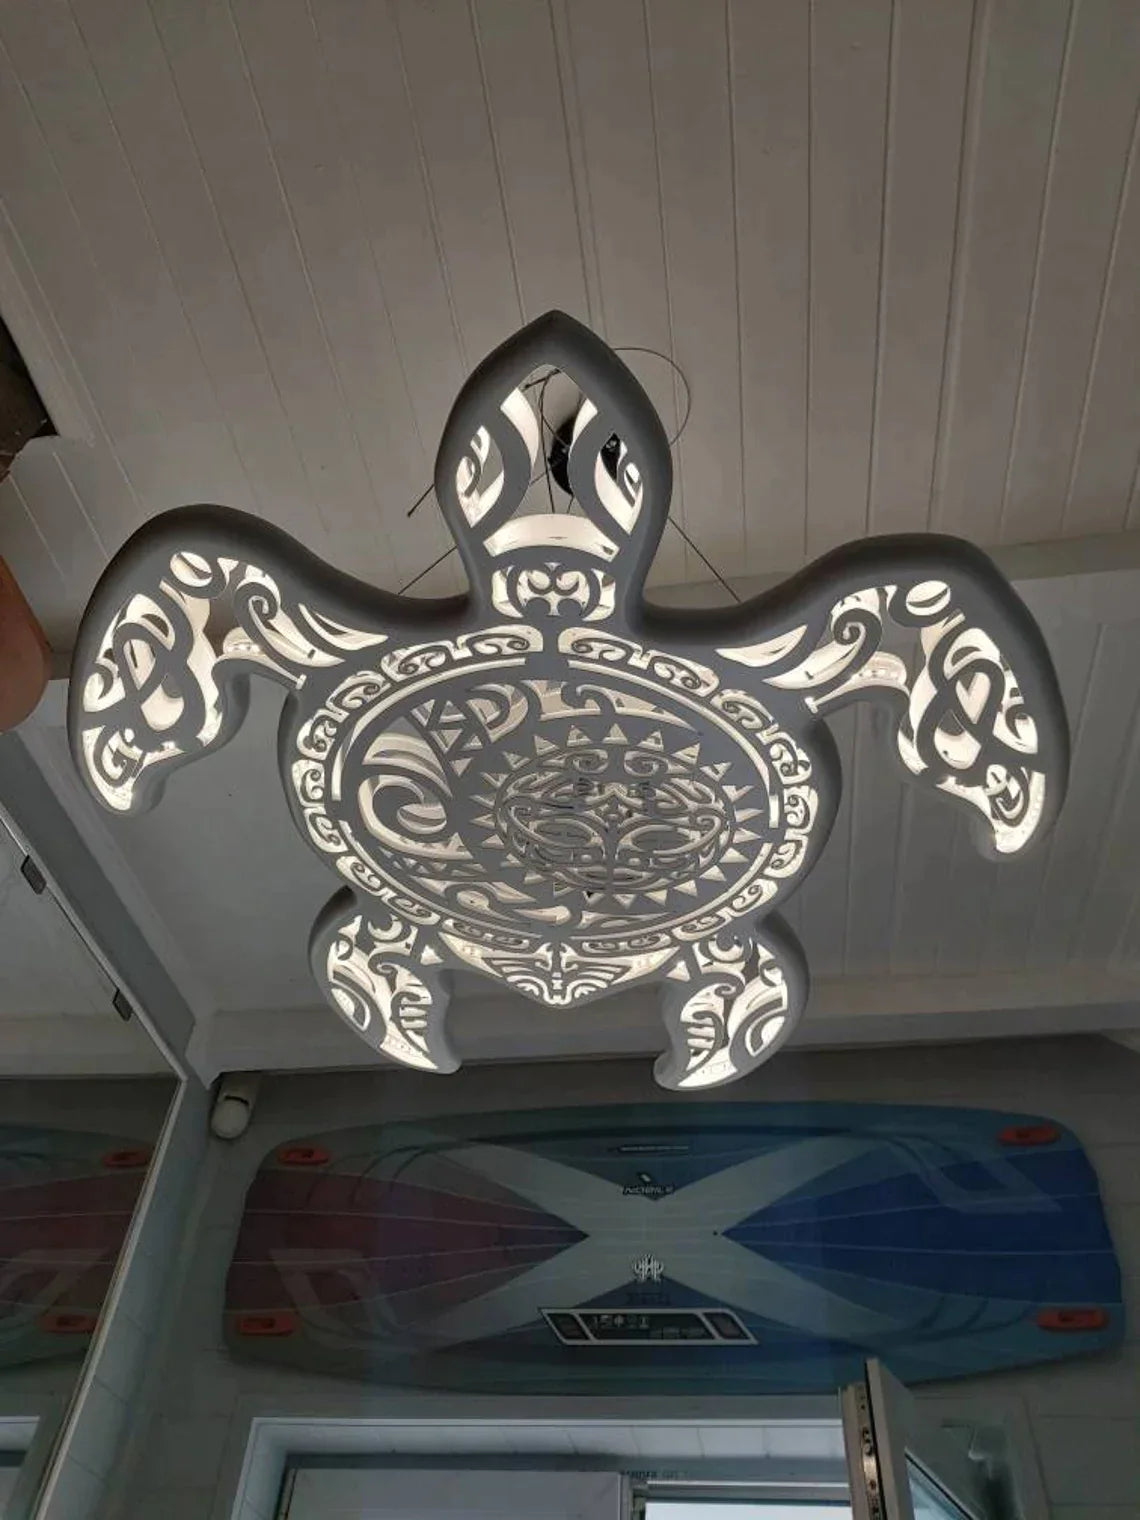 2 Unique Blue pattern Turtles Ceiling Chandeliers: LED Wall Lamp in Maori Surf Style